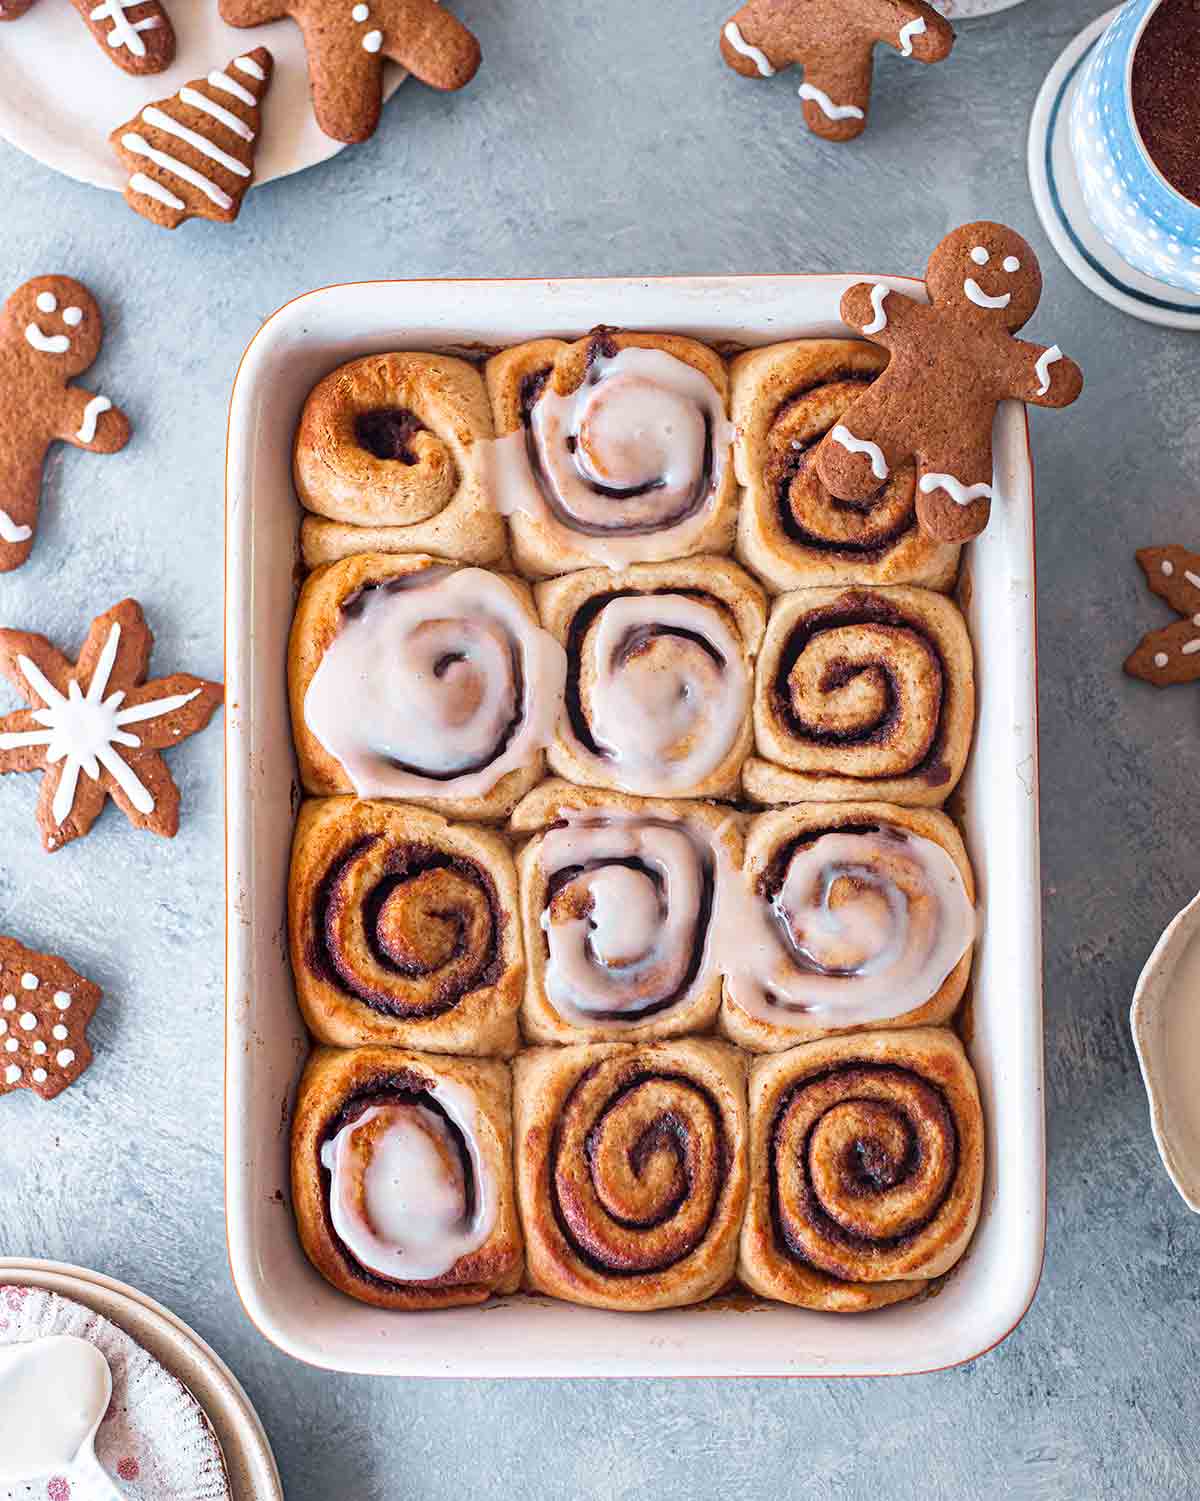 Vegan gingerbread cinnamon rolls in baking tray with gingerbread cut out cookies and hot chocolate surrounding it.